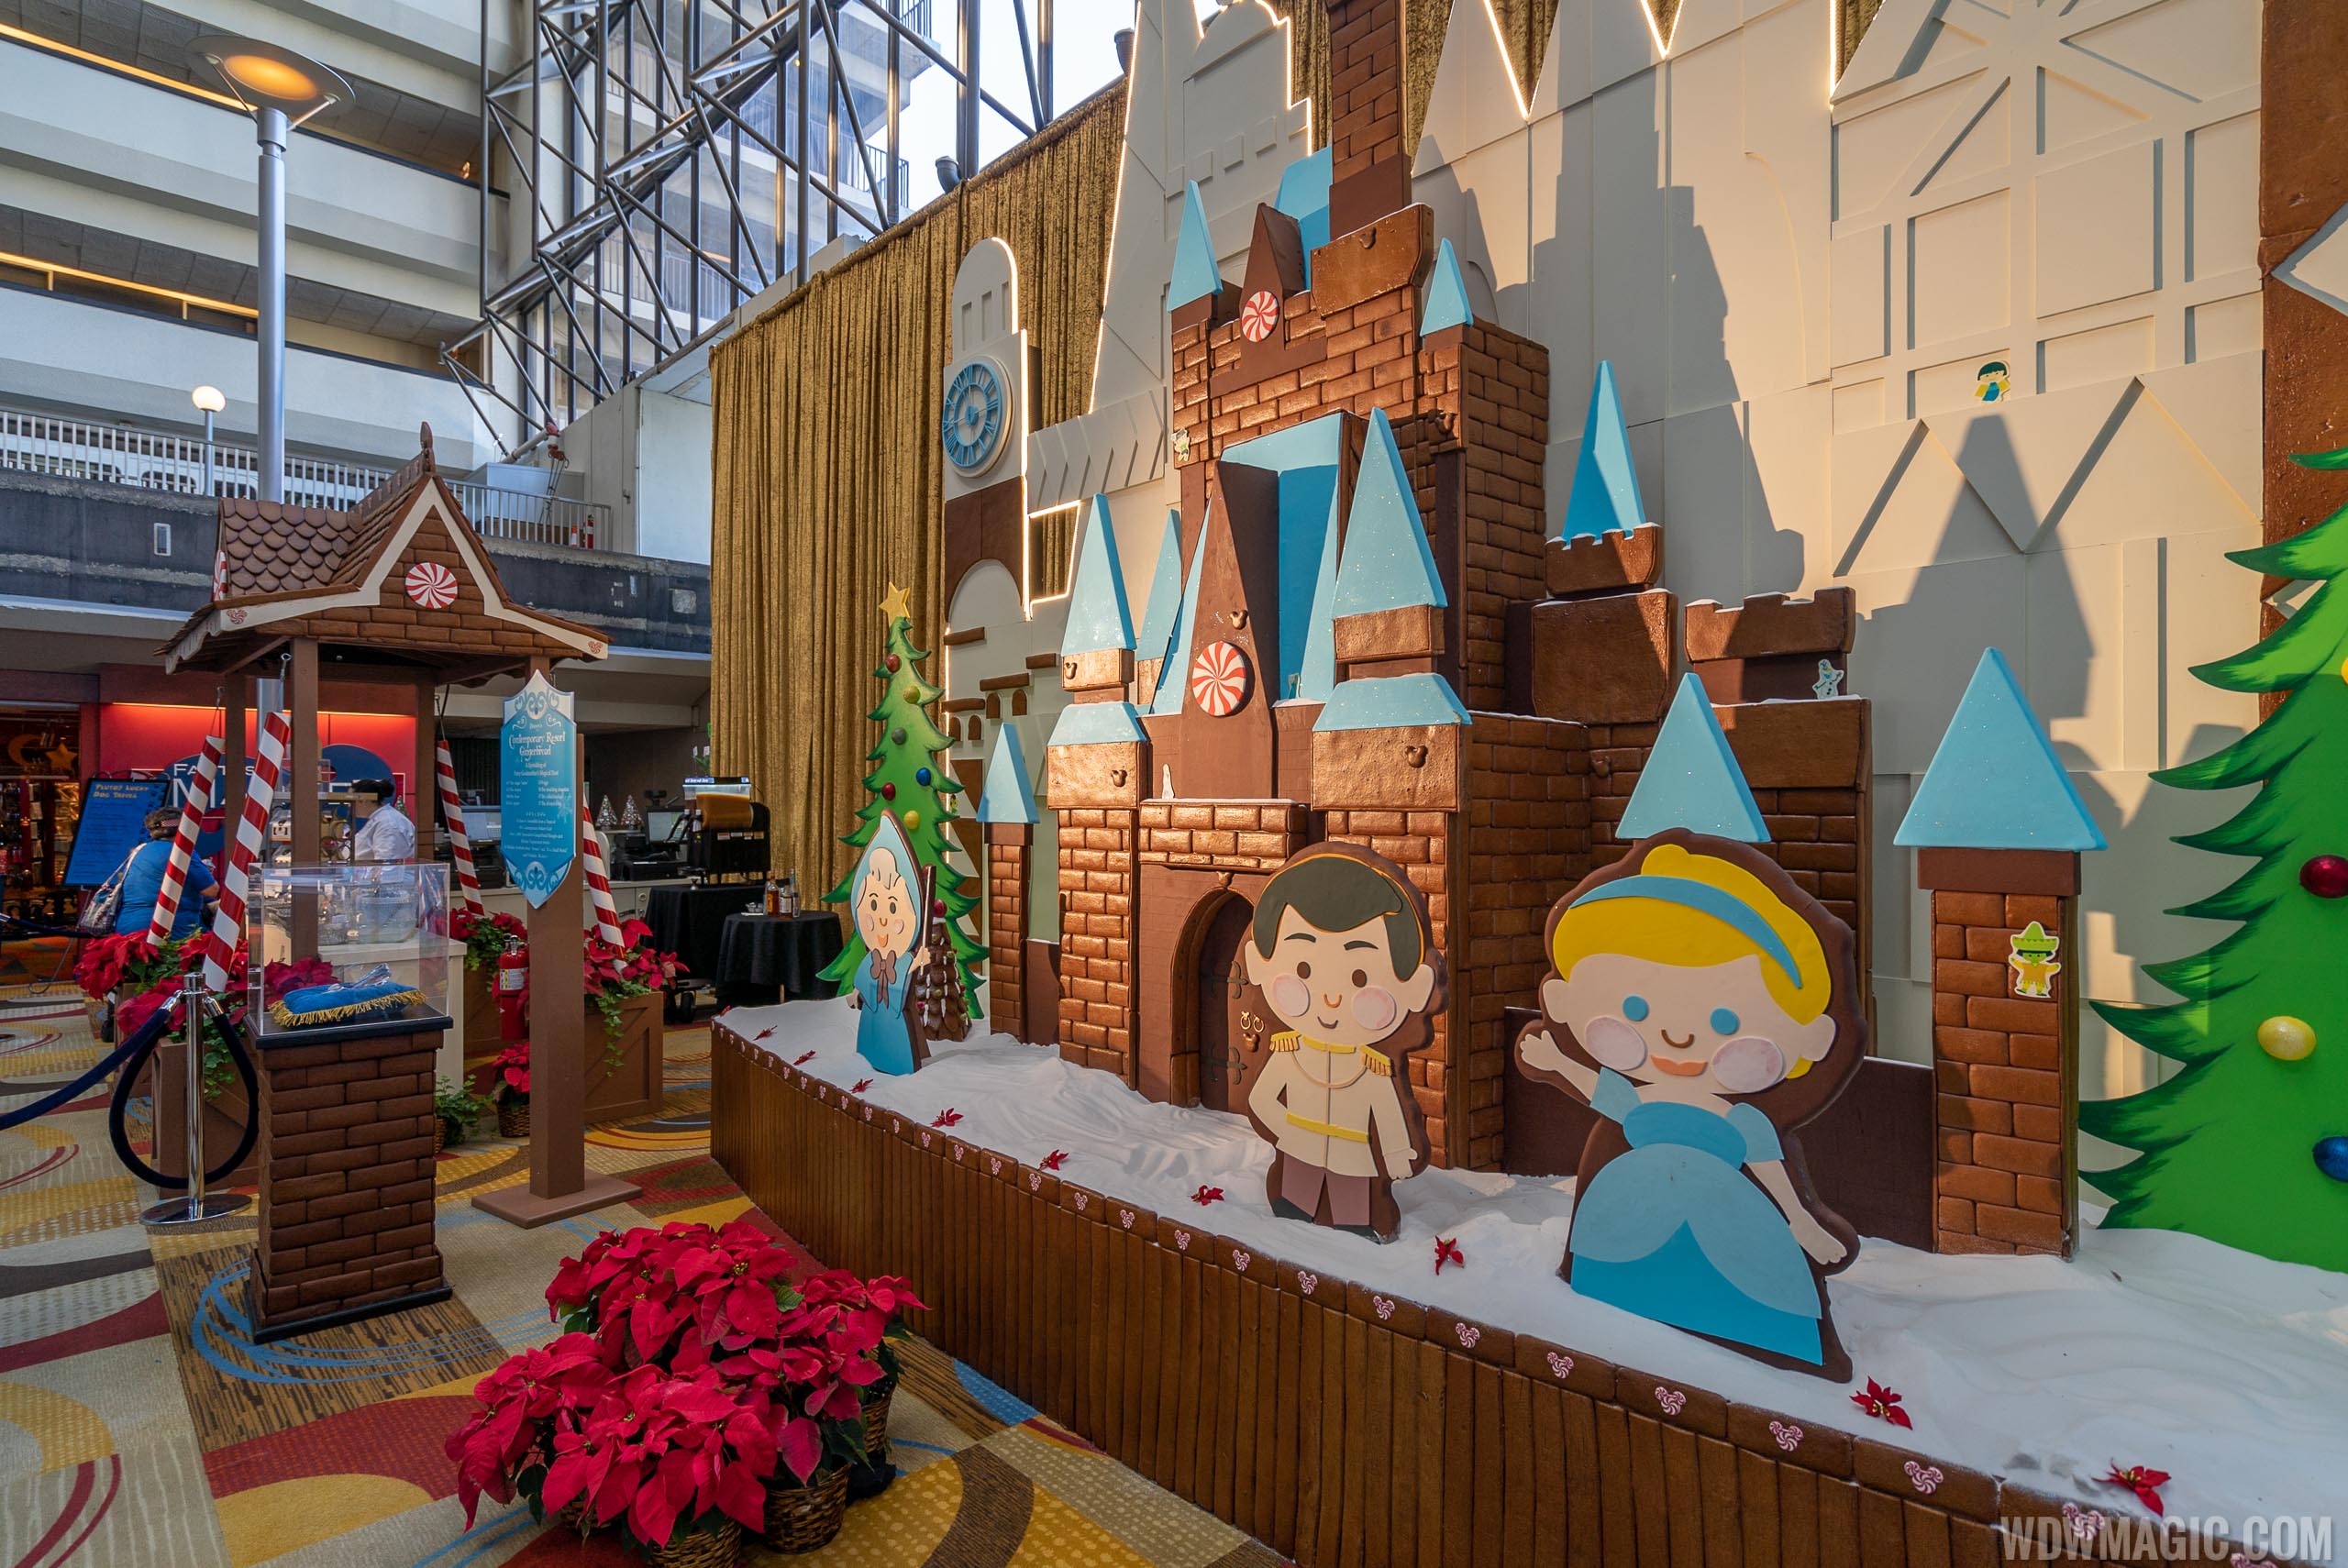 Disney's Contemporary Resort Gingerbread House and Christmas Holiday decor 2019 - Photo 6 of 12